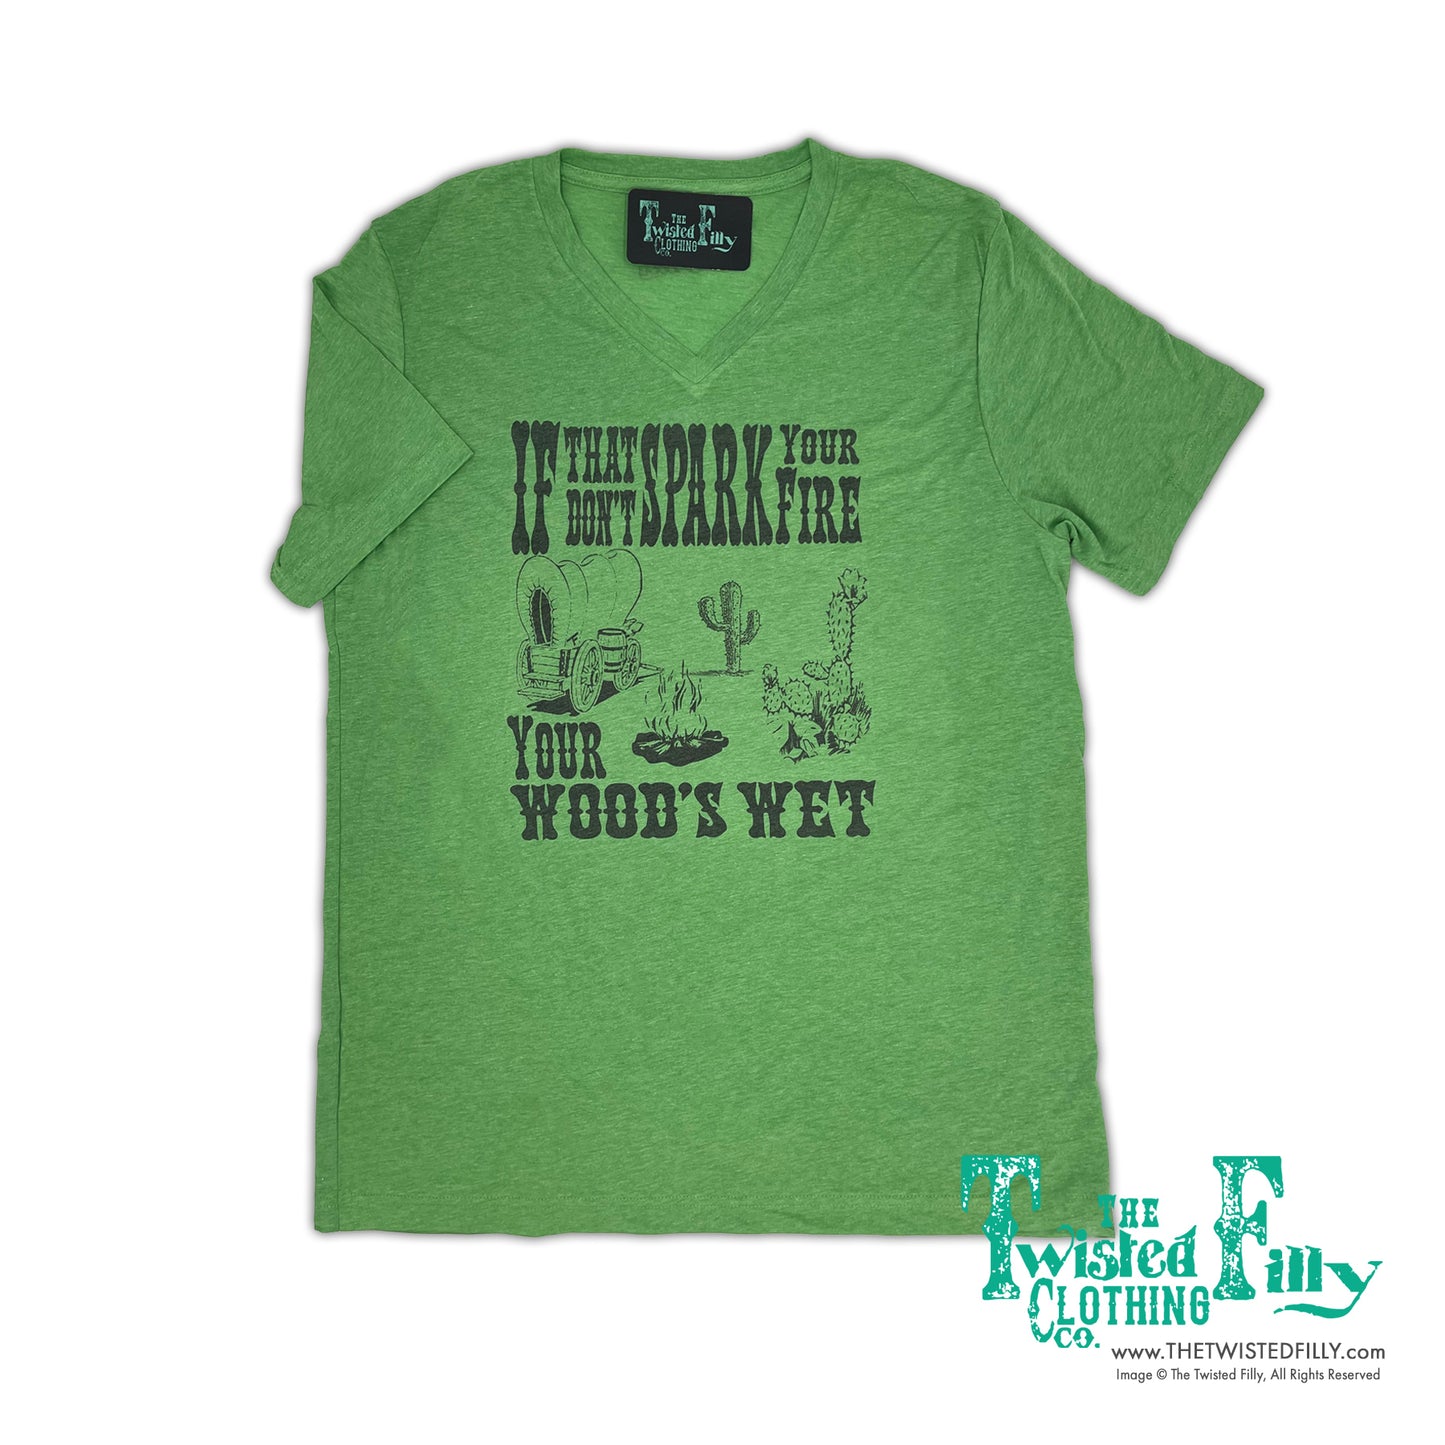 If That Don't Spark Your Fire - S/S Adult V-Neck Tee - Green